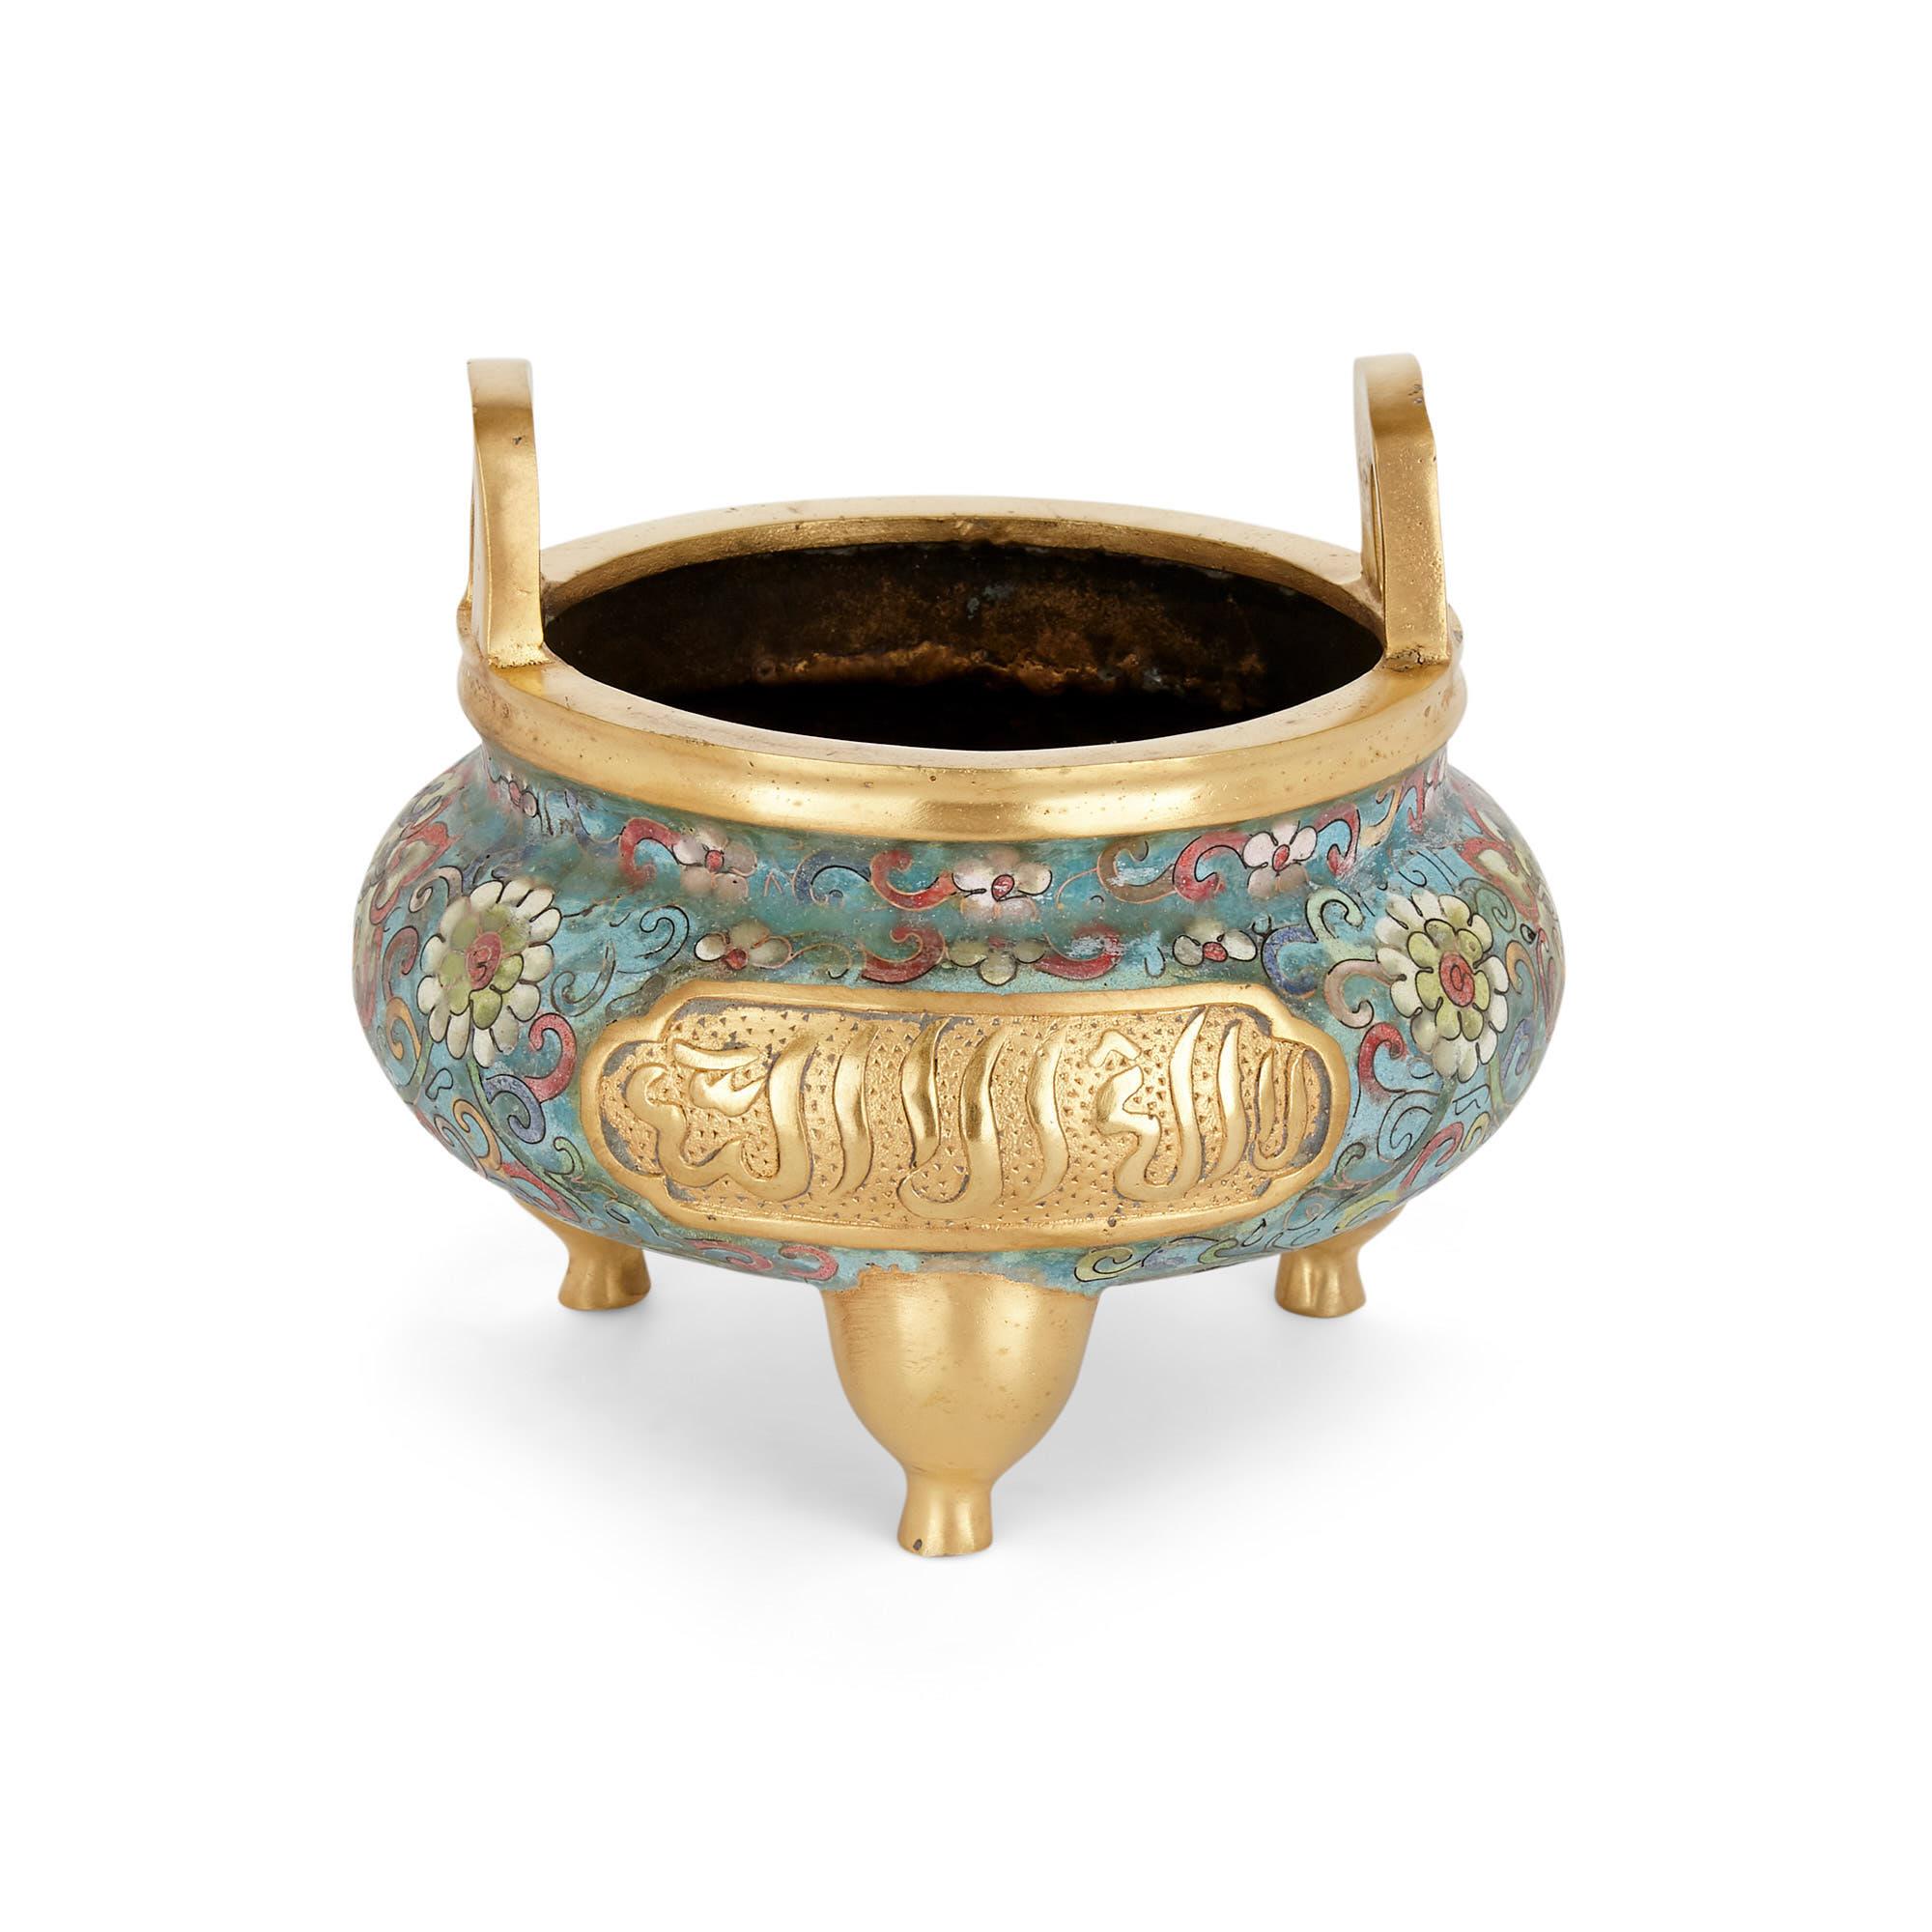 Chinese ormolu and cloisonné enamel vase for the Islamic market
Chinese, early 20th century
Dimensions: Height 14cm, diameter 15cm

Crafted in China, this fine ormolu and cloisonné enamel bowl was intended for export to Islamic markets. Sitting